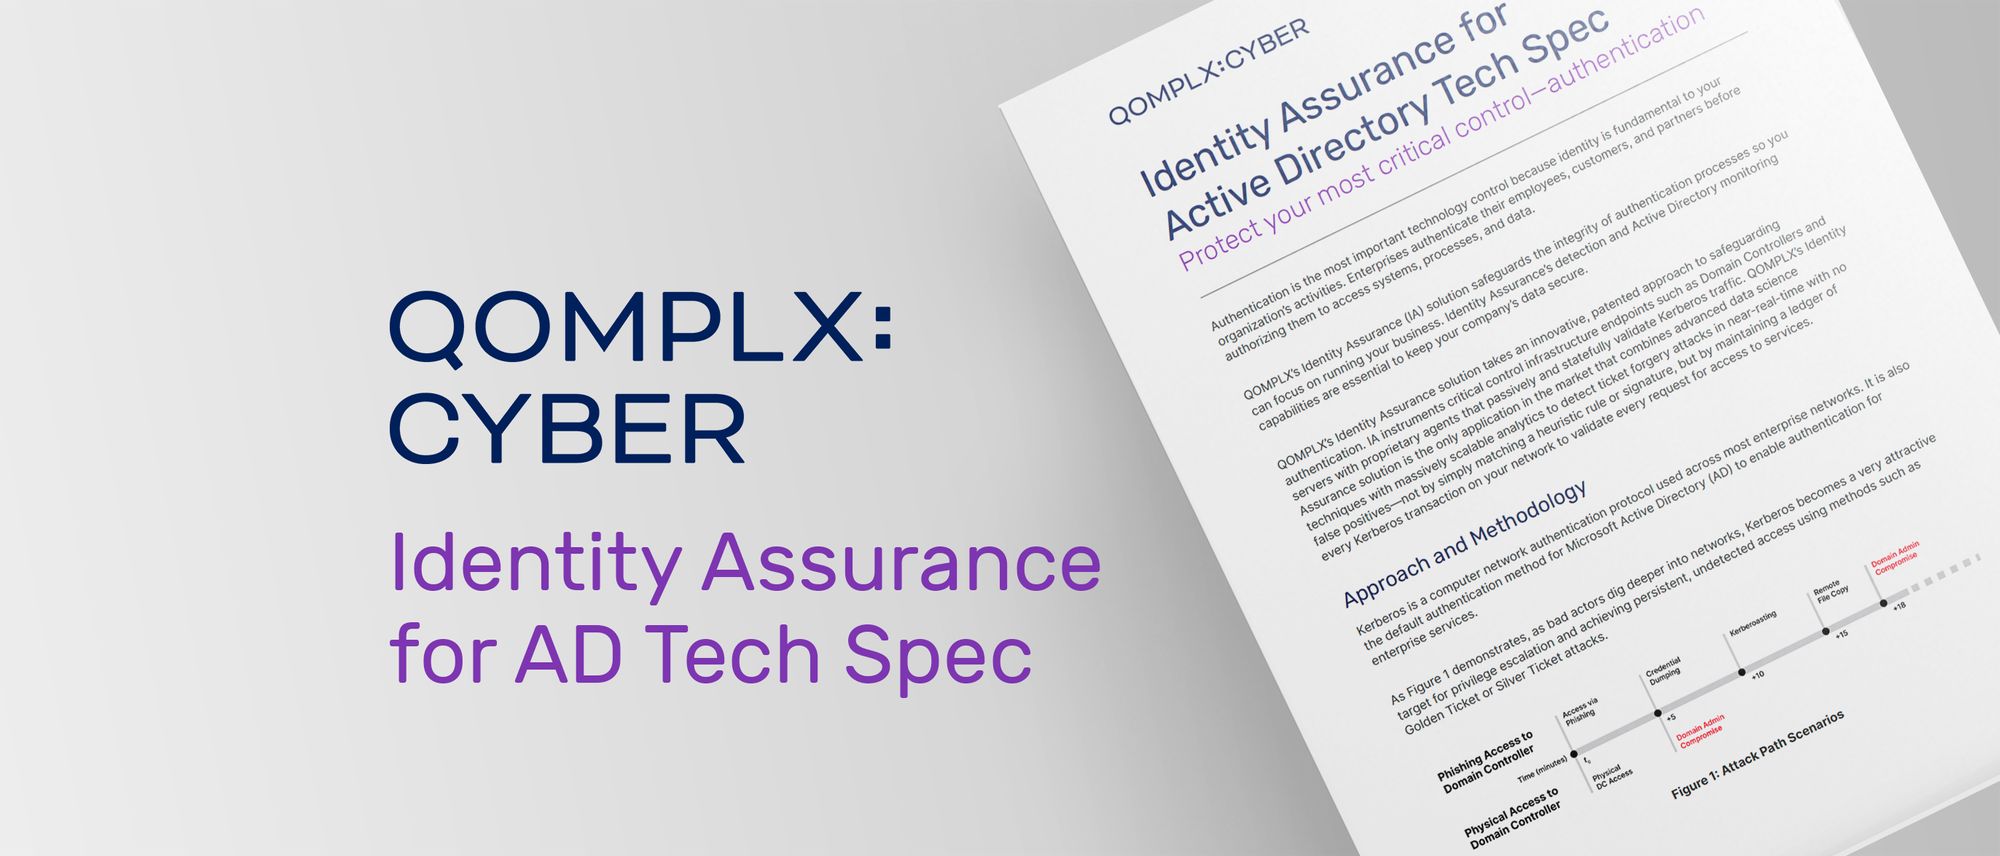 Identity Assurance for Active Directory Tech Spec